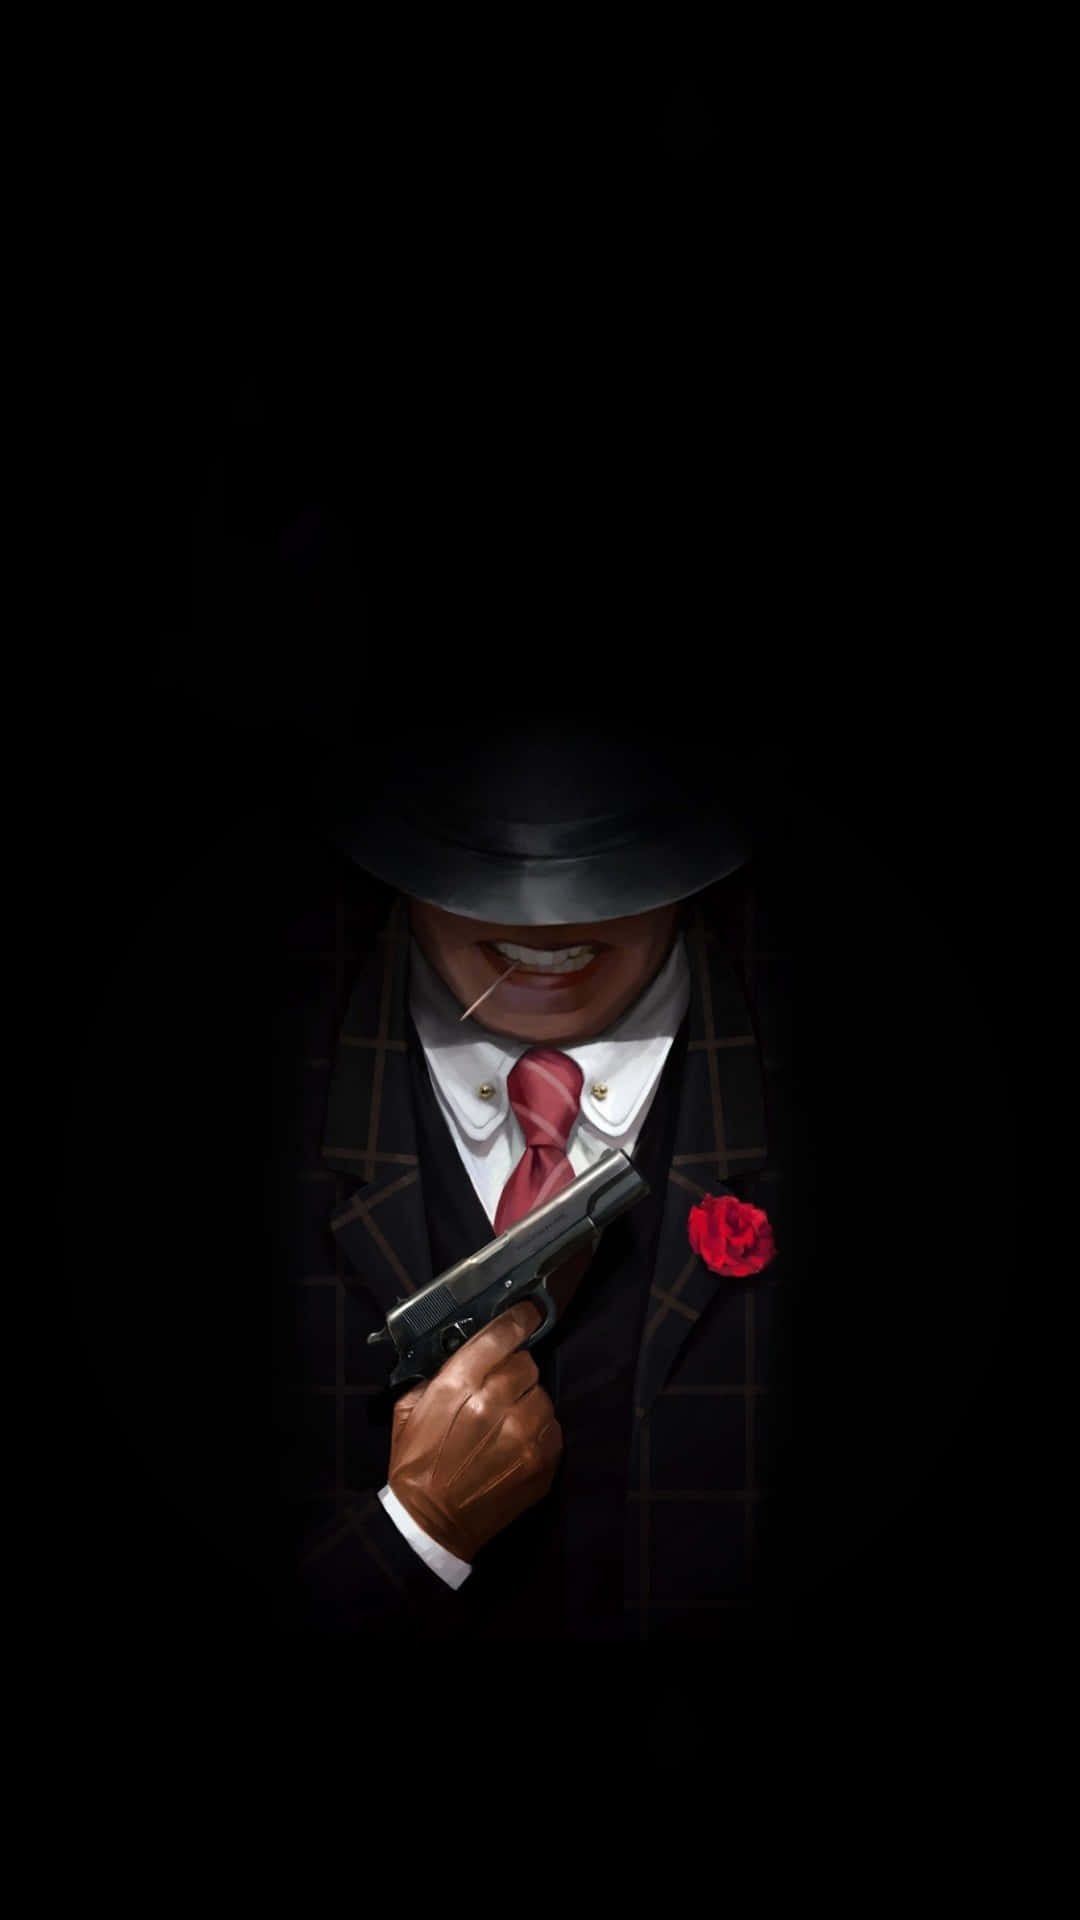 Take the power of the Mafia in your pocket with the Iphone Wallpaper